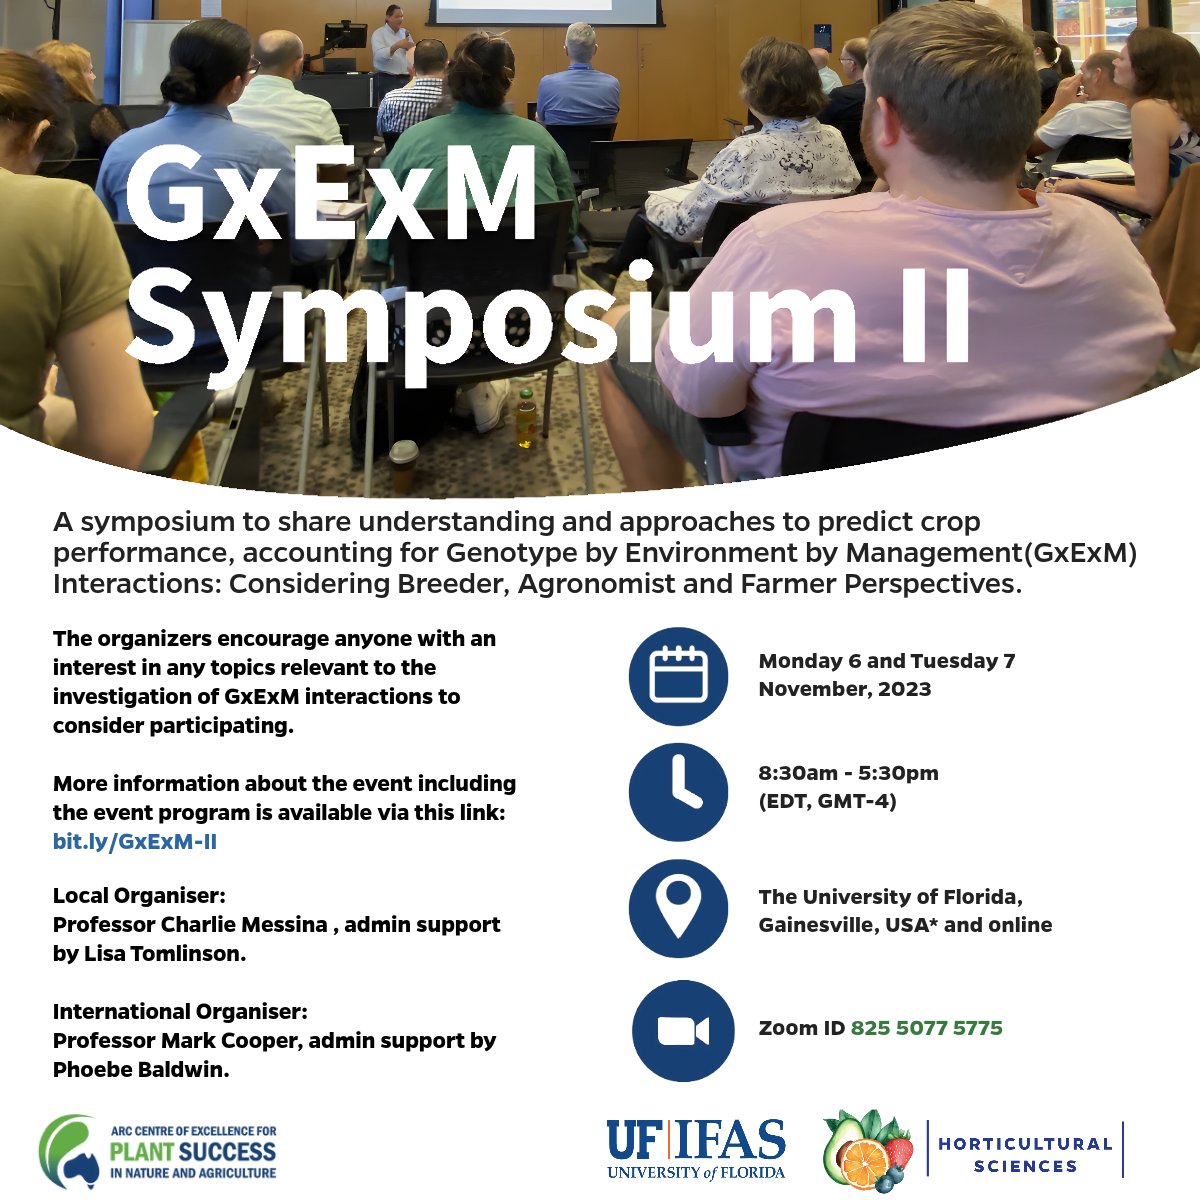 Join us for the GxExM Symposium II event. @UF_IFAS